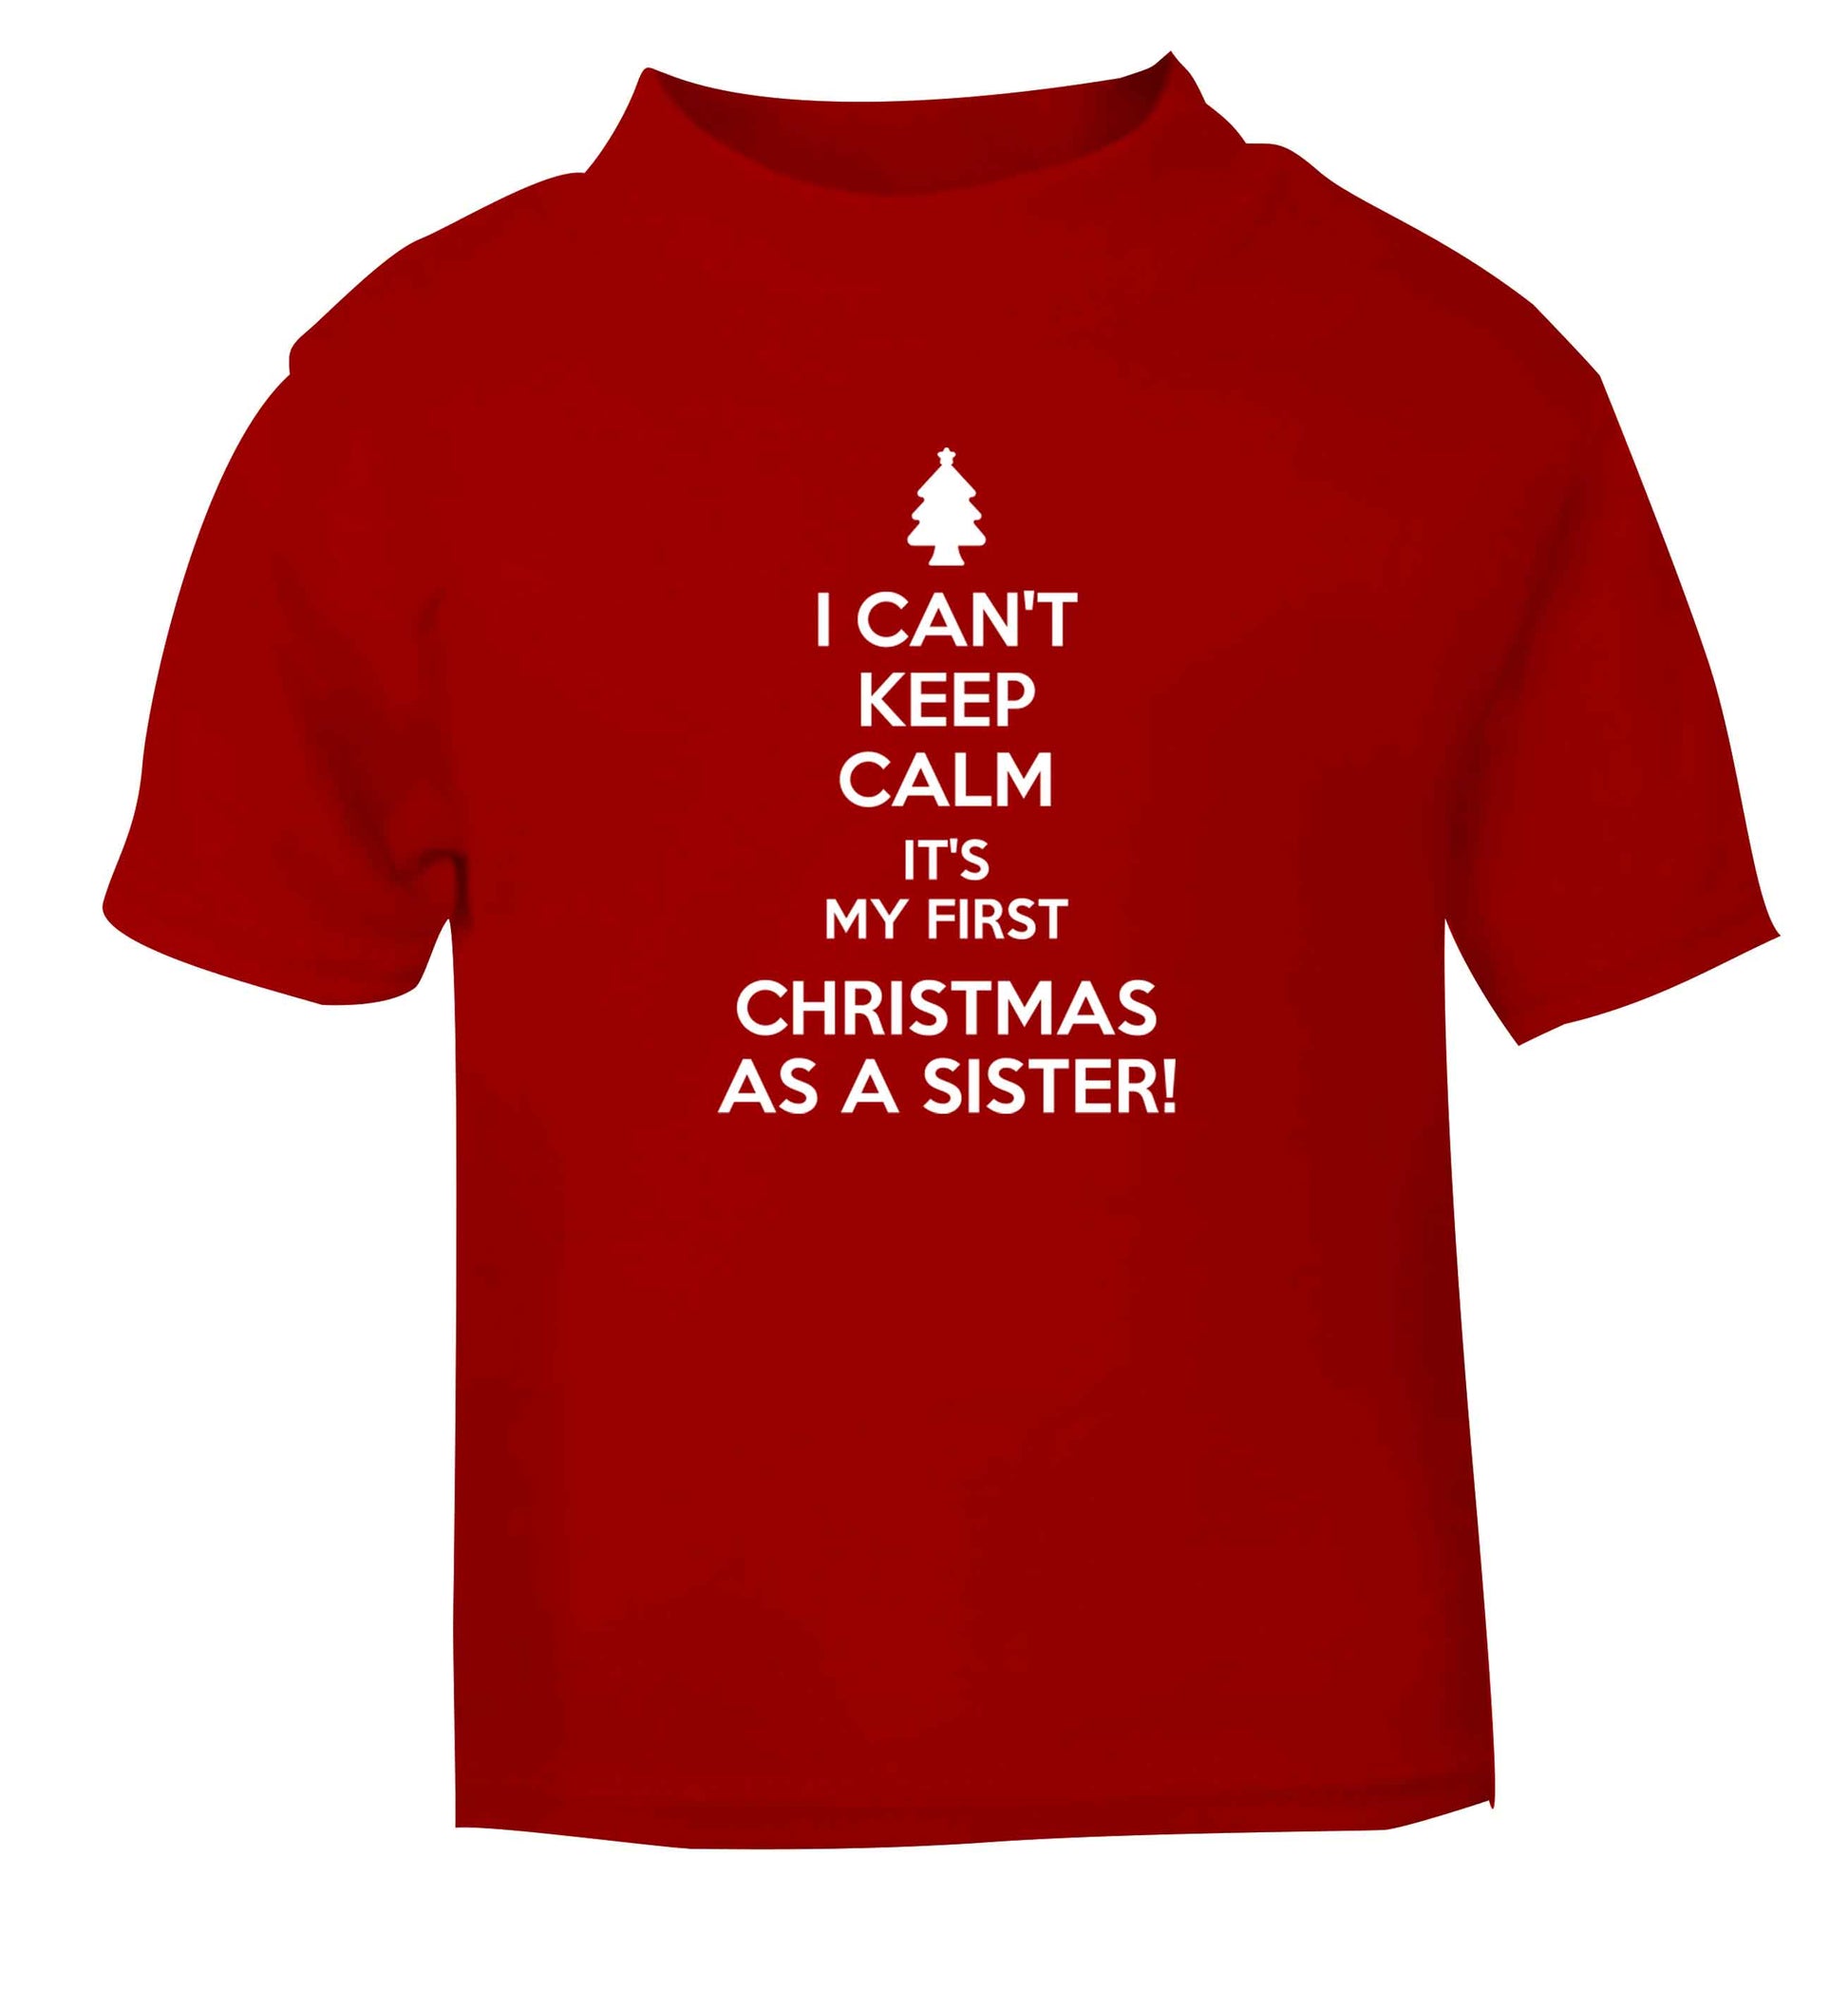 I can't keep calm it's my first Christmas as a sister! red Baby Toddler Tshirt 2 Years